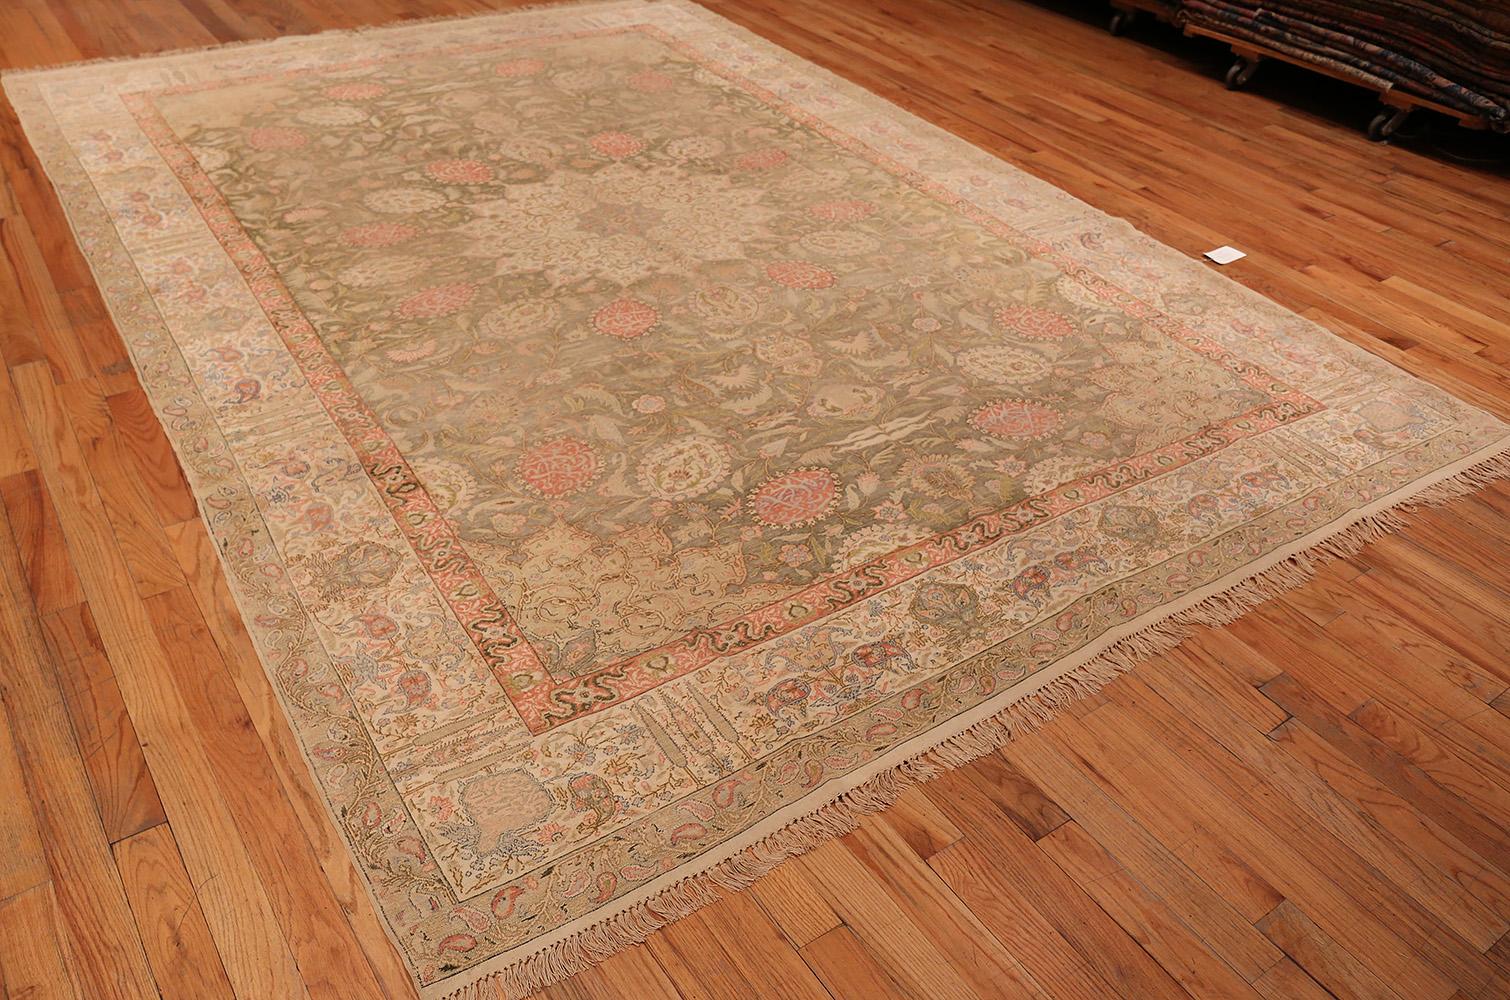 Beautiful and Decorative Antique Silk Turkish Kayseri Shabby Chic Rug, Country Of Origin / Rug Type: Turkish Rugs, Circa Date: 1900. Size: 9 ft x 12 ft 6 in (2.74 m x 3.81 m).